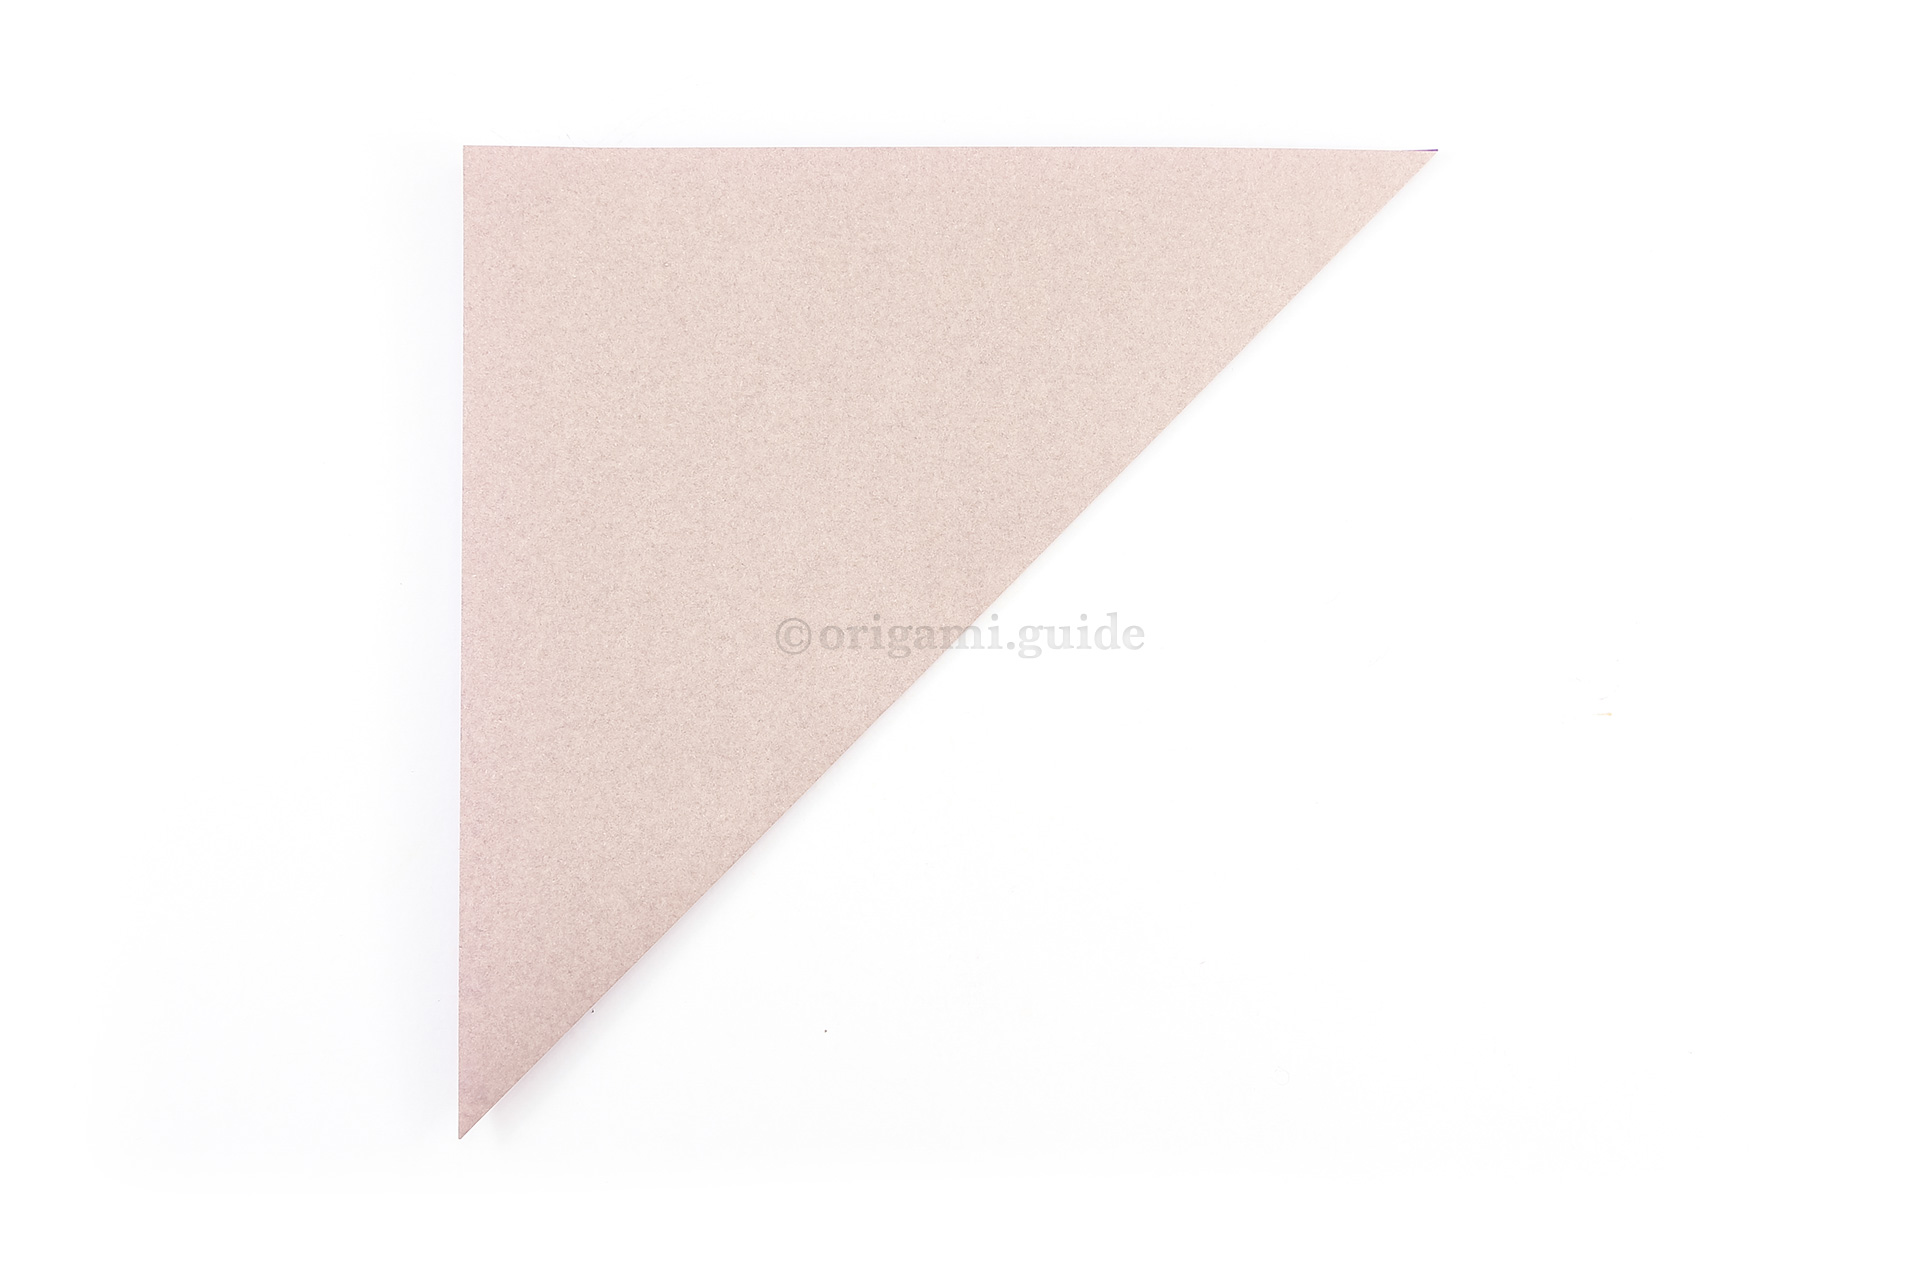 We will fold a square base to start. Fold the bottom right point of the paper diagonally up to the top left corner.